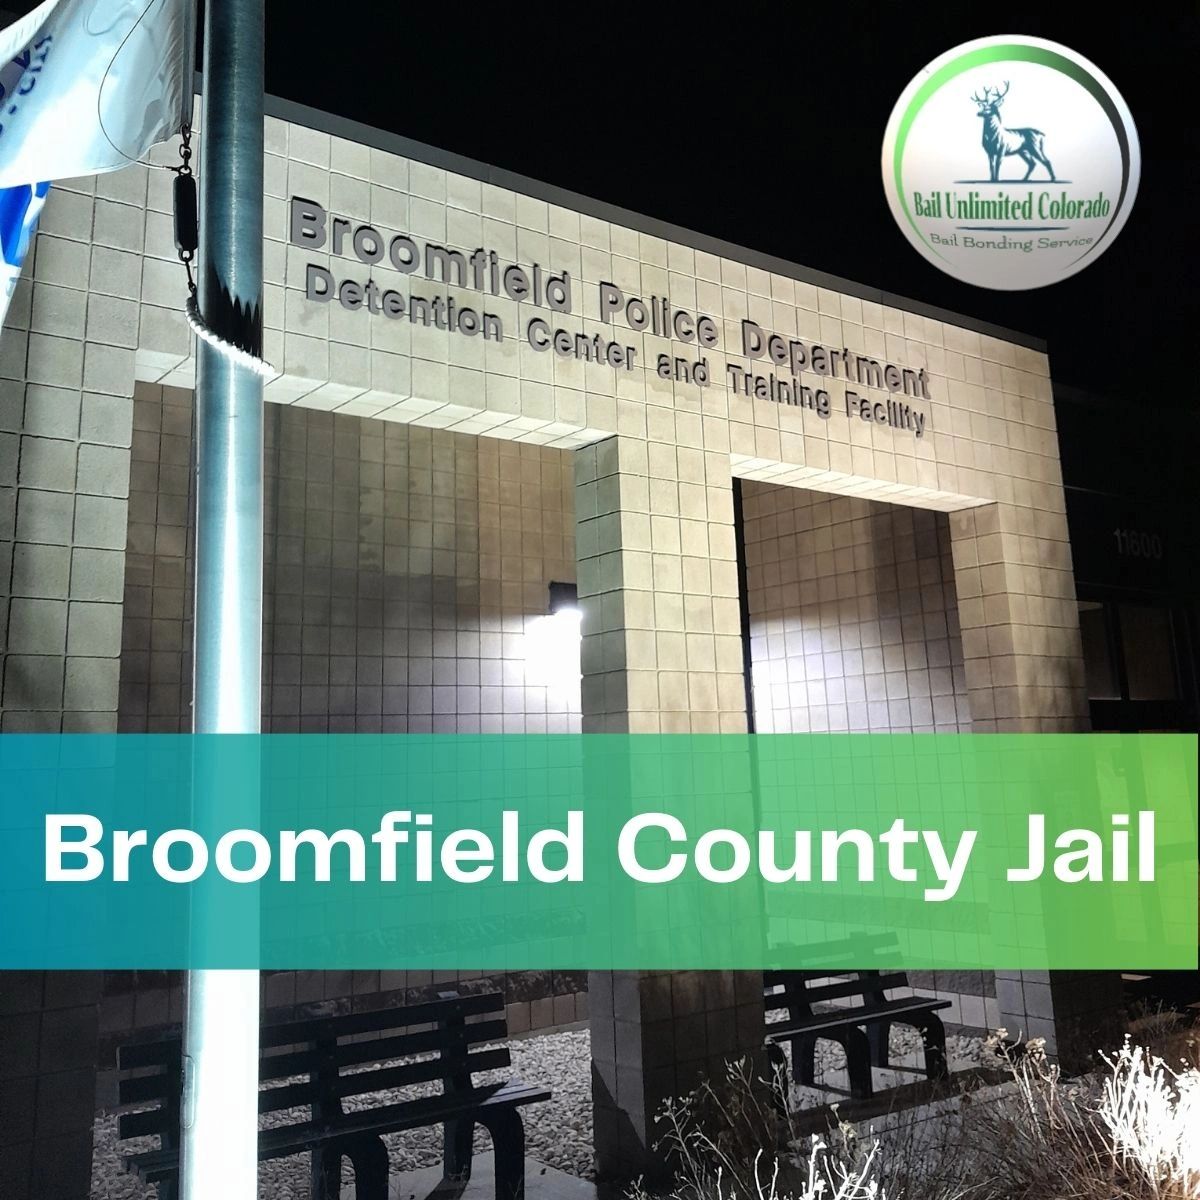 Broomfield Police Department Detention Center Building. Broomfield County Jail. Bail Unlimited LOGO